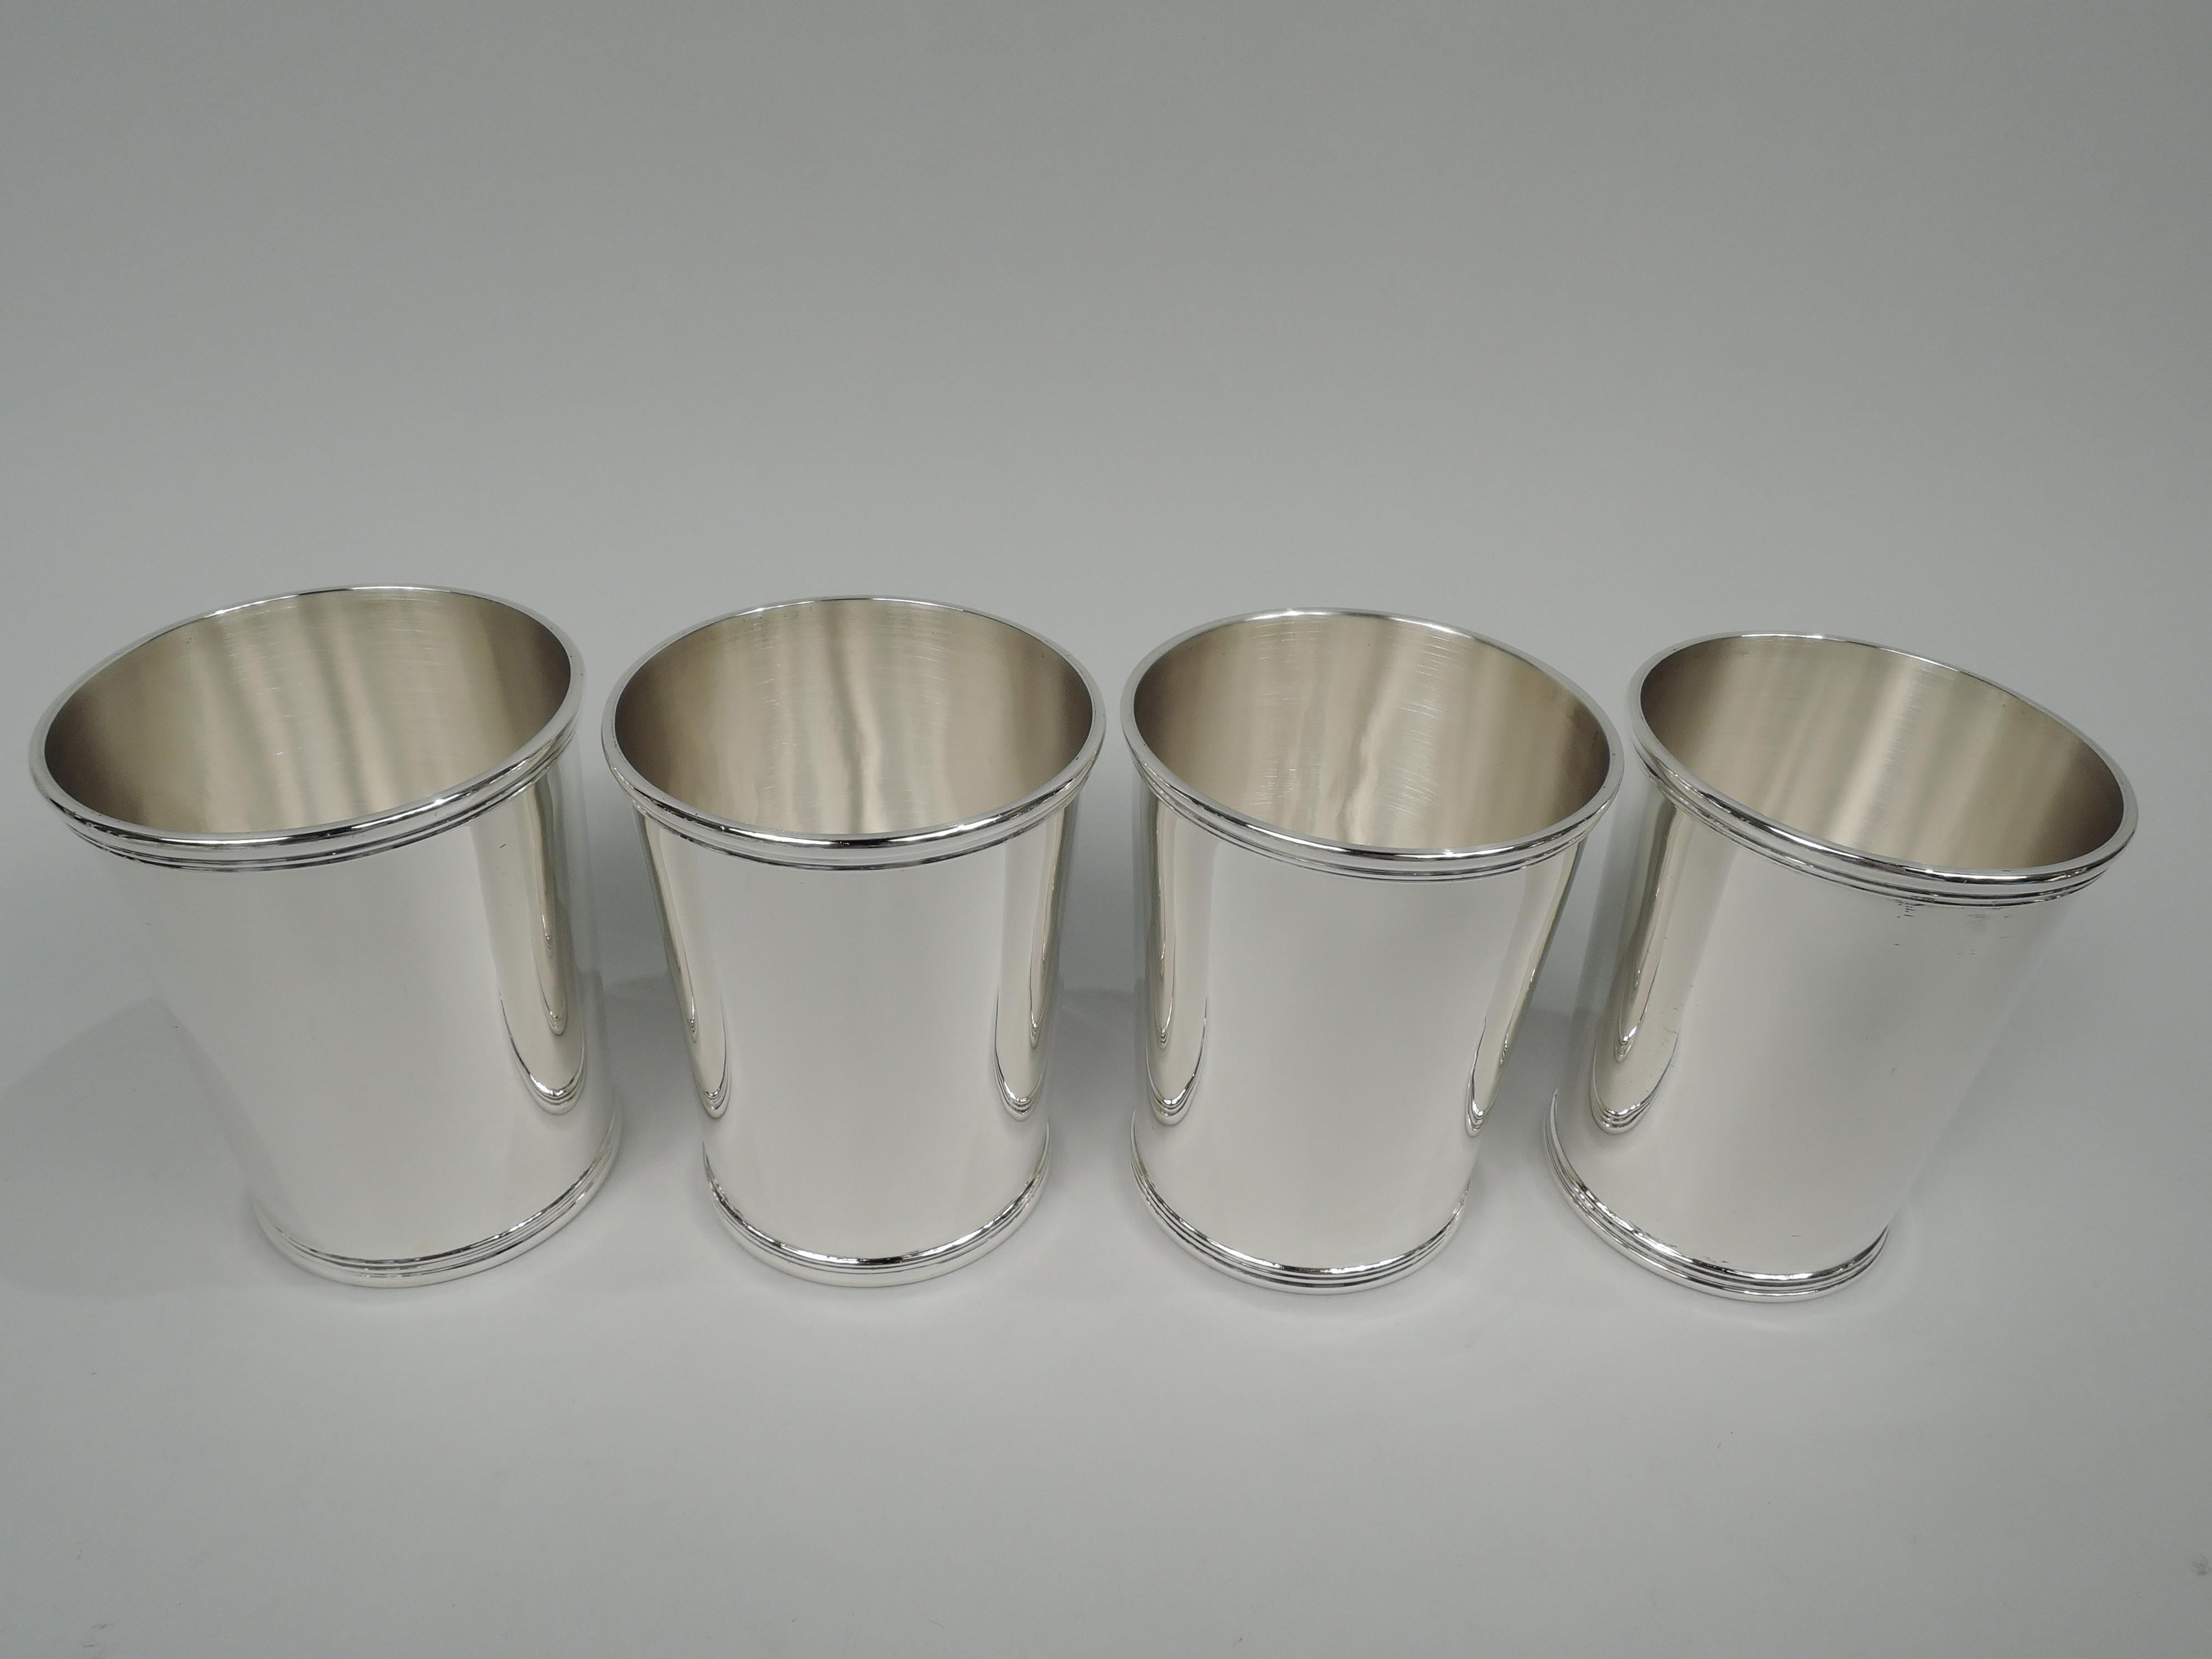 Set of 4 sterling silver mint julep cups. Made by International Silver Co. in Meriden, Conn. Each: Straight and tapering sides with reeded rim and base. Fully marked including maker’s stamp and no. C3532. Total weight: 13.3 troy ounces. 